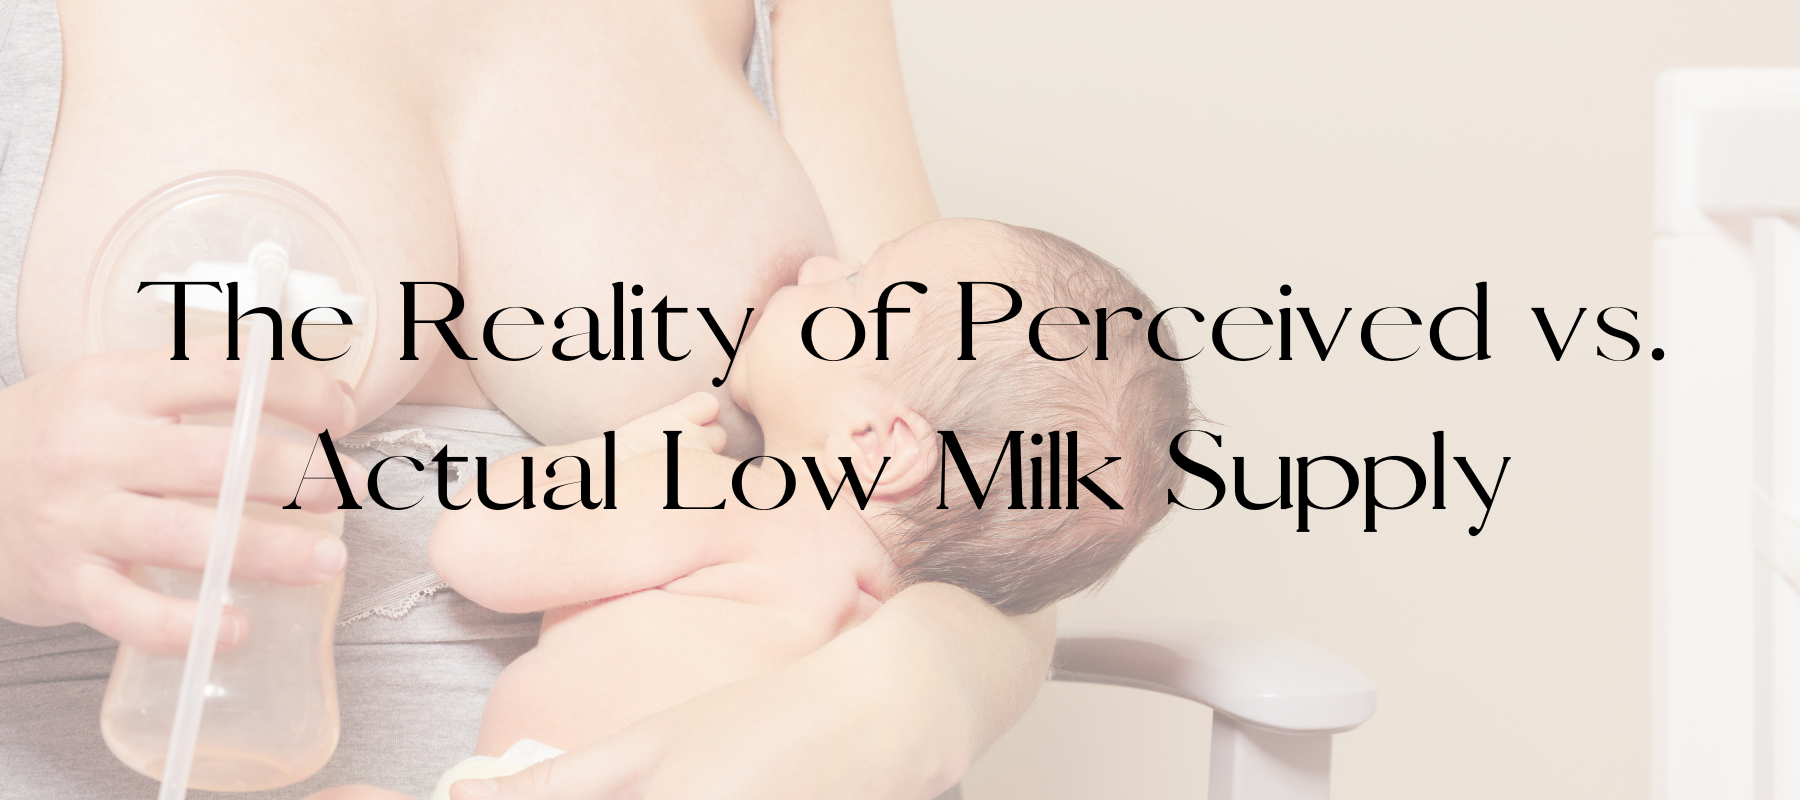 The reality of perceived vs. actual low milk supply